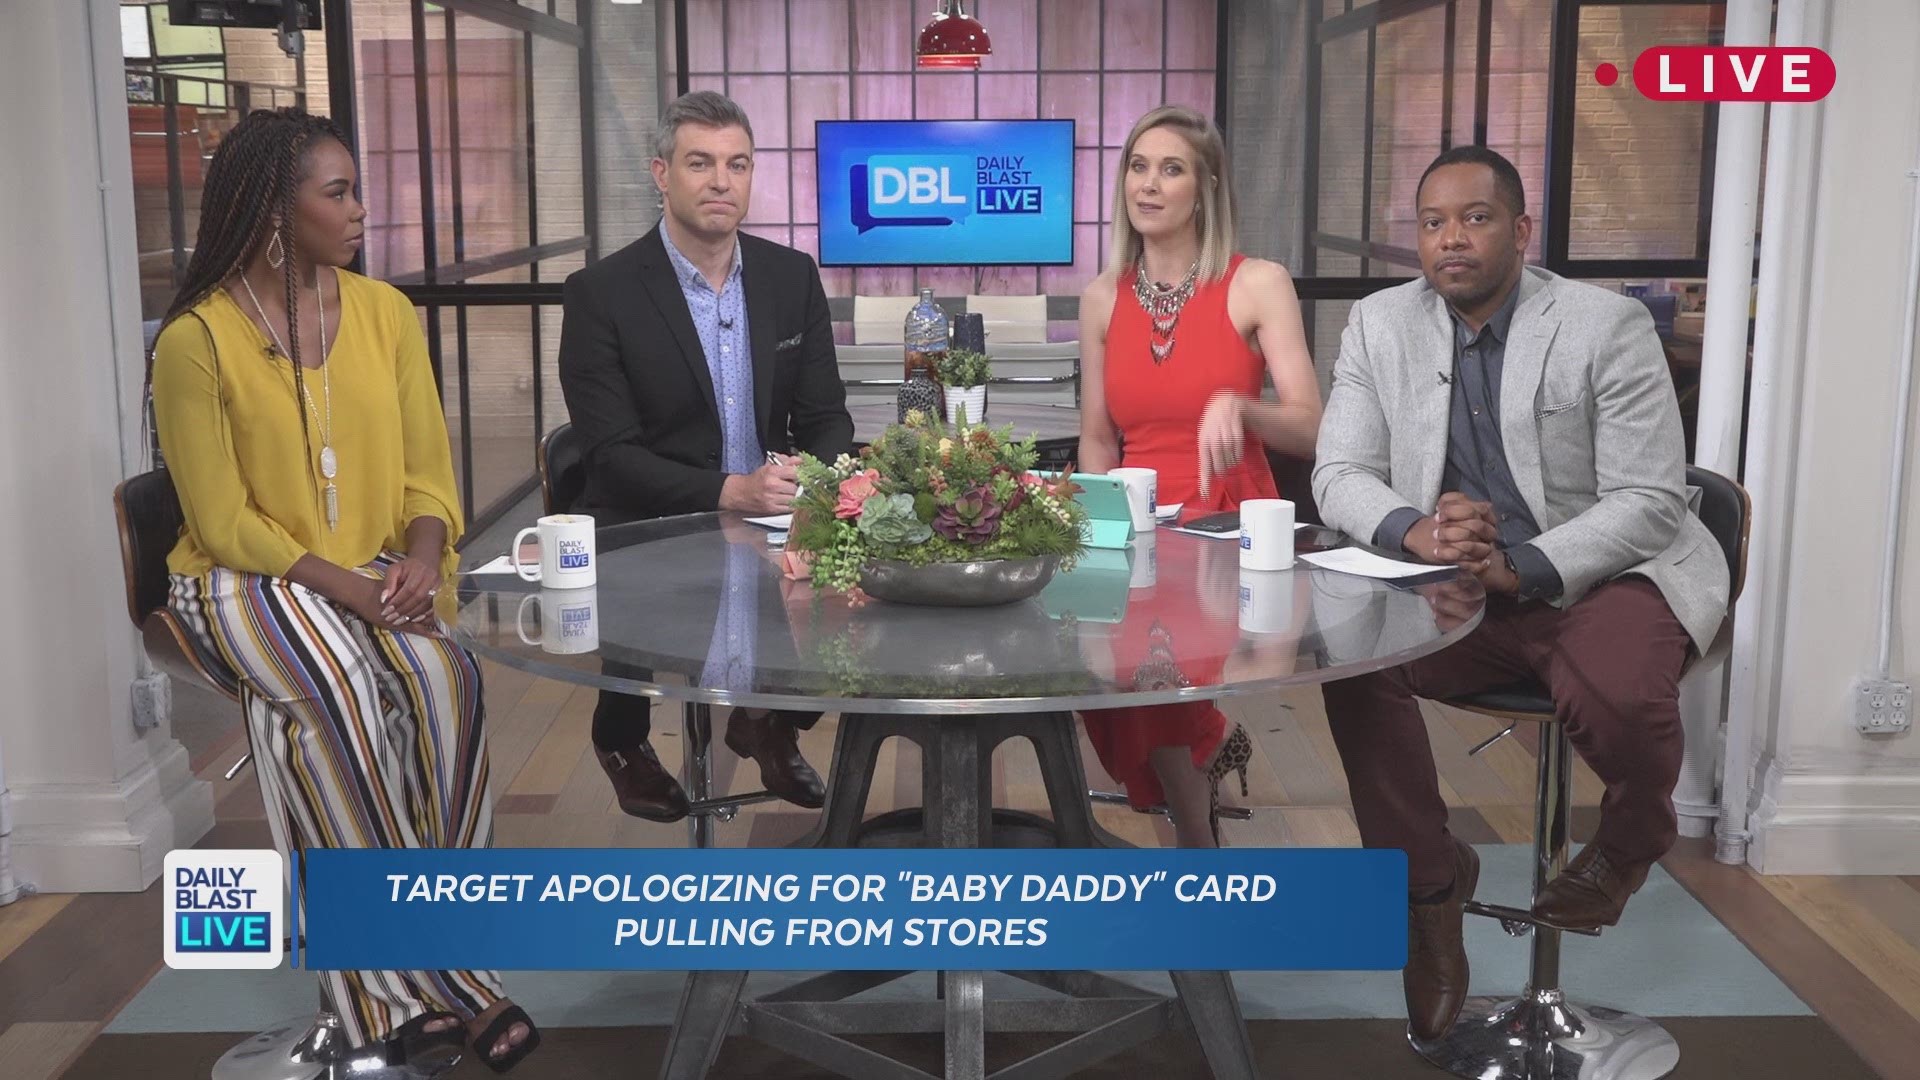 Superstore Target is apologizing after customers complained about an offensive greeting card that was sold in stores ahead of Father's Day. The card simply said 'Baby Daddy' and featured an African-American couple. Daily Blast LIVE co-hosts discuss race i